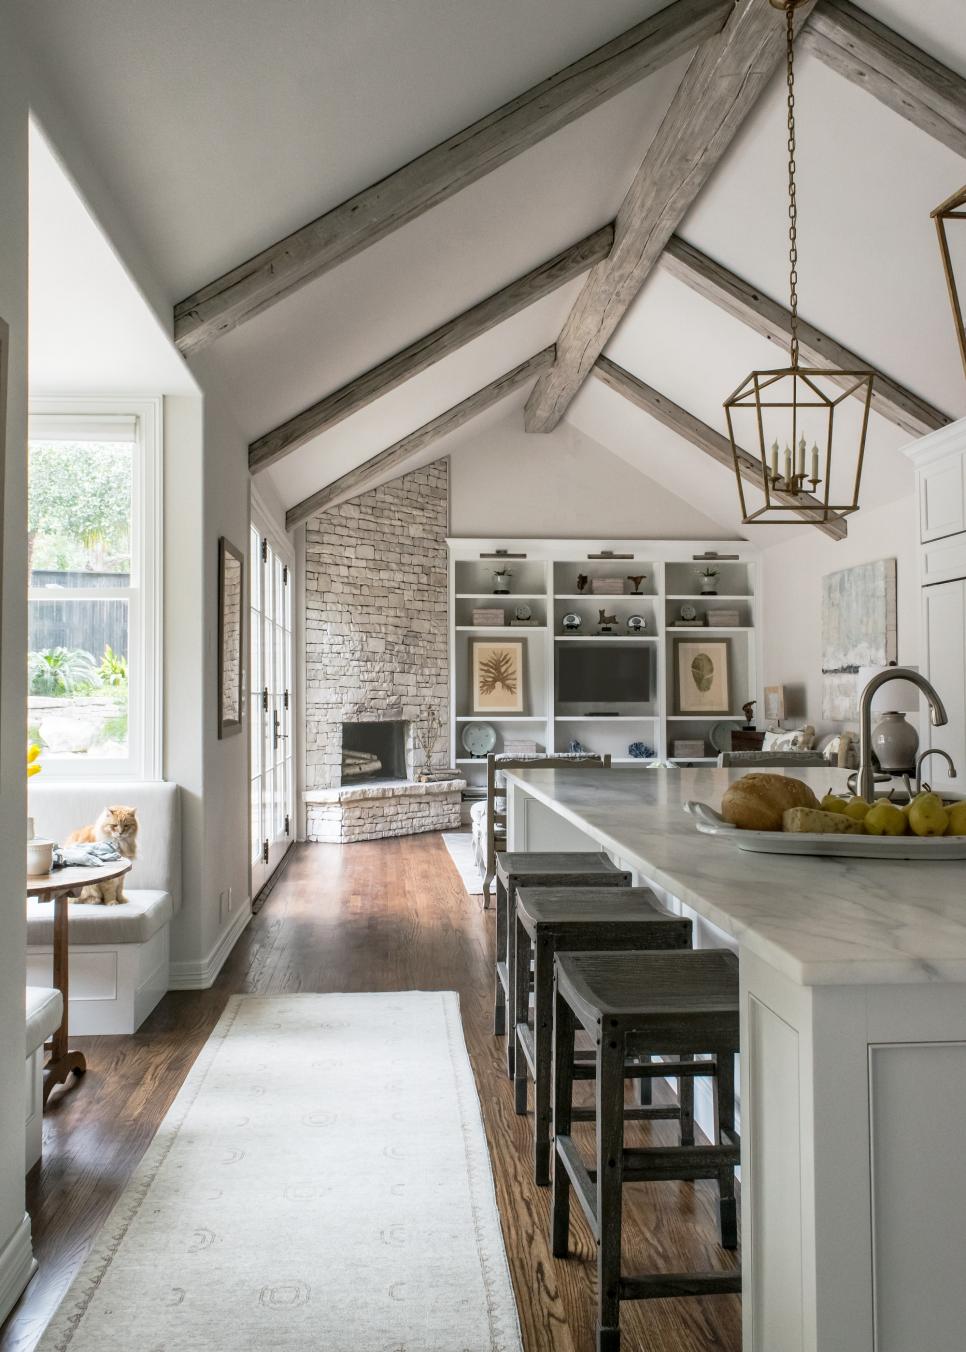 White Cottage Open Plan Kitchen With Vaulted Ceiling | HGTV